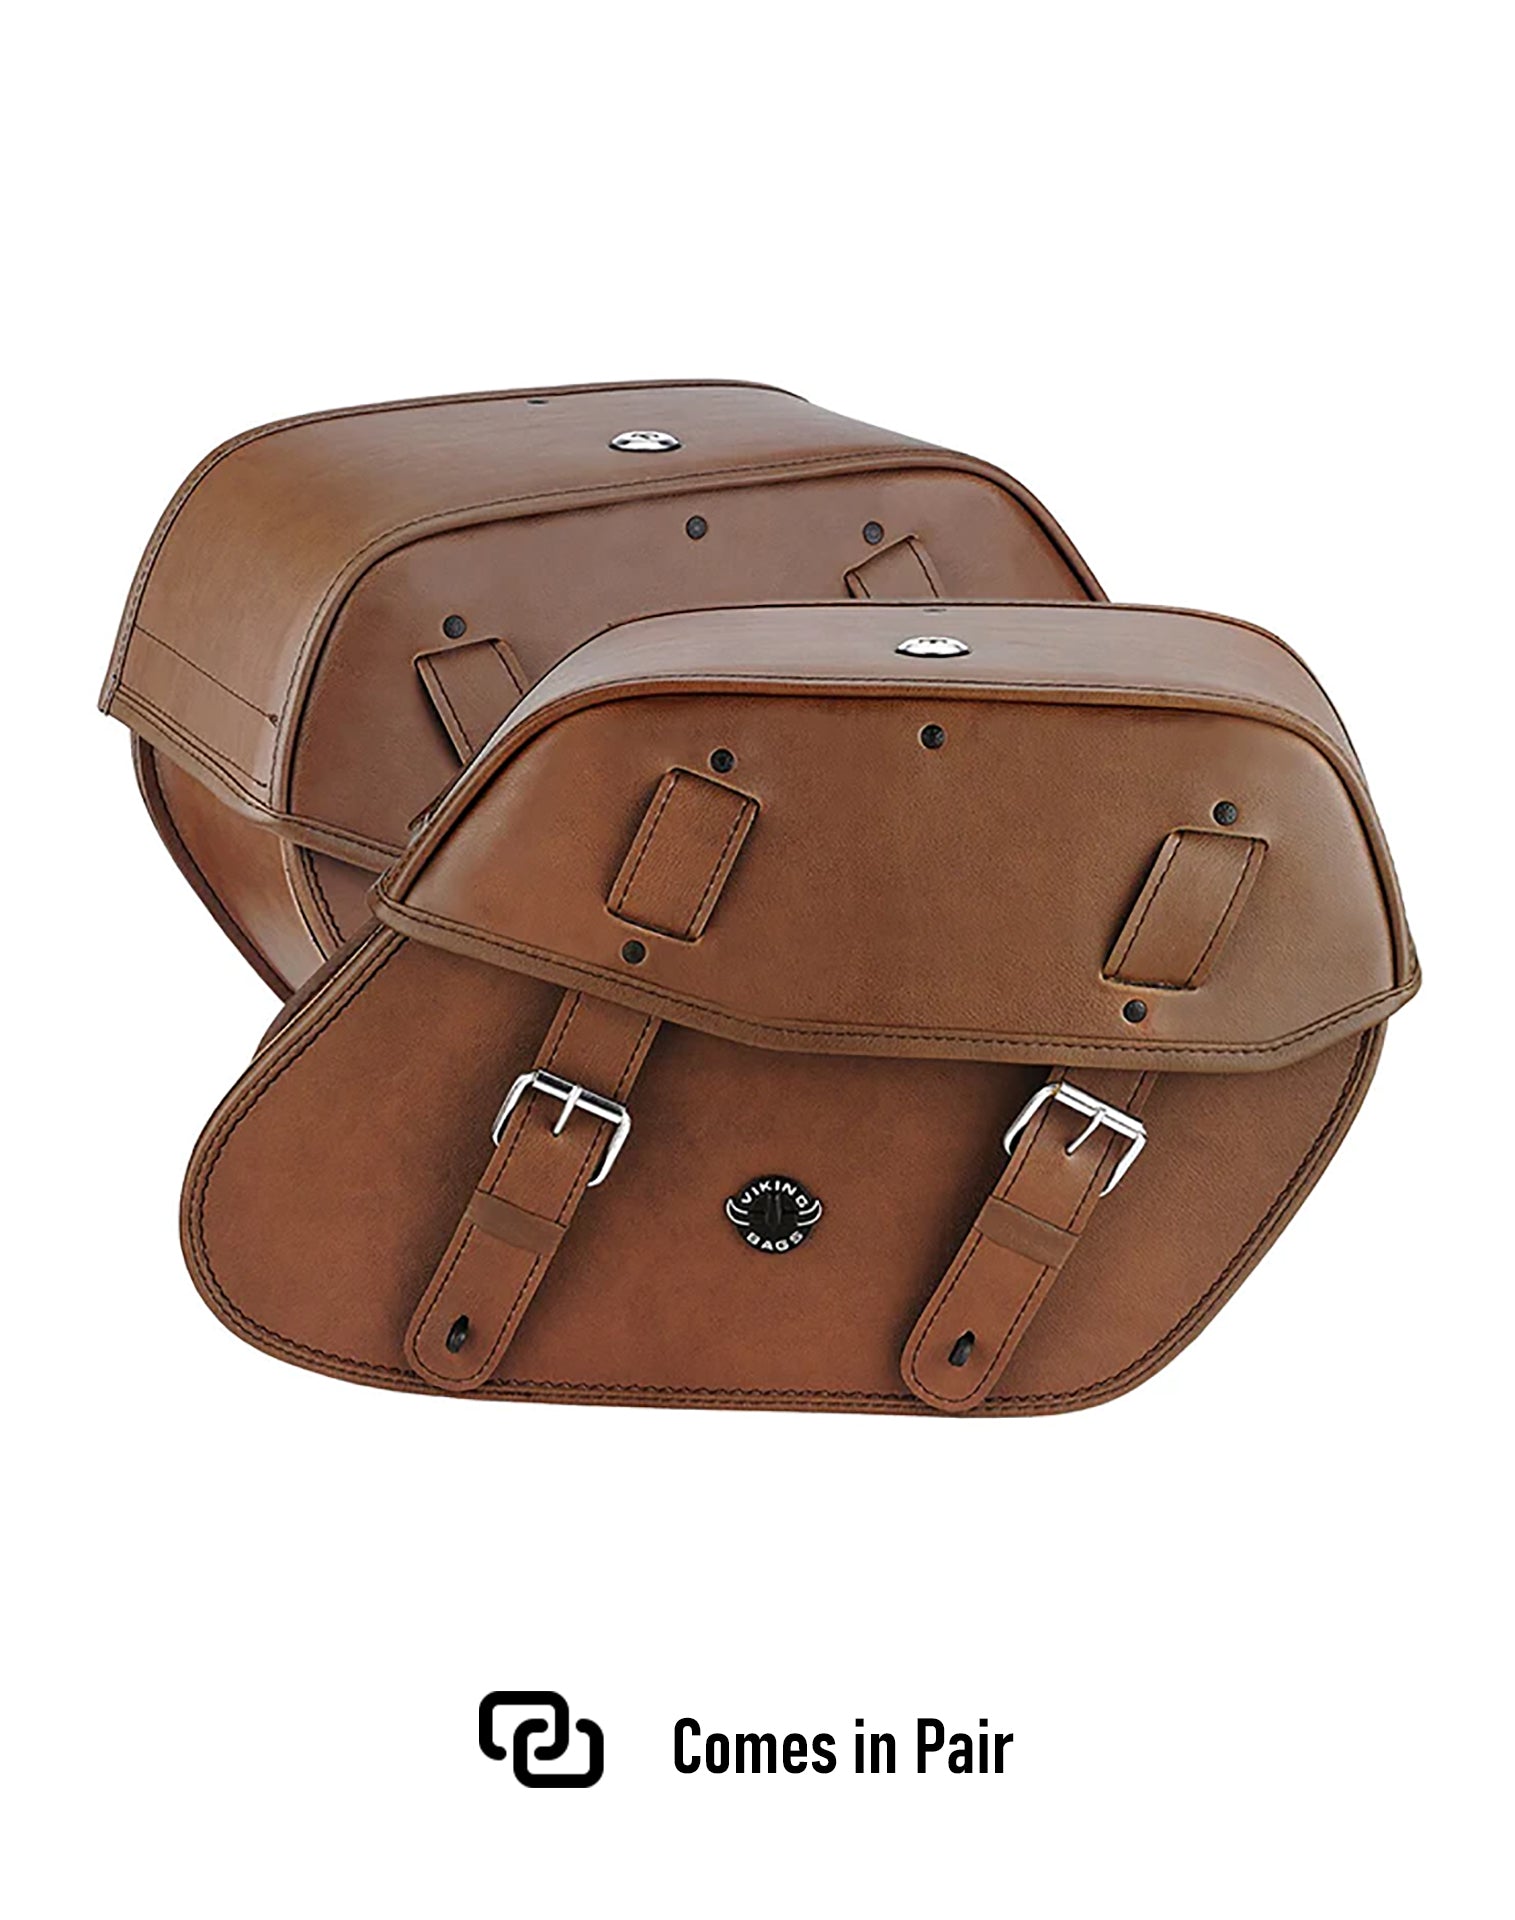 Viking Odin Brown Large Honda Valkyrie 1500 Standard Leather Motorcycle Saddlebags Weather Resistant Bags Comes in Pair